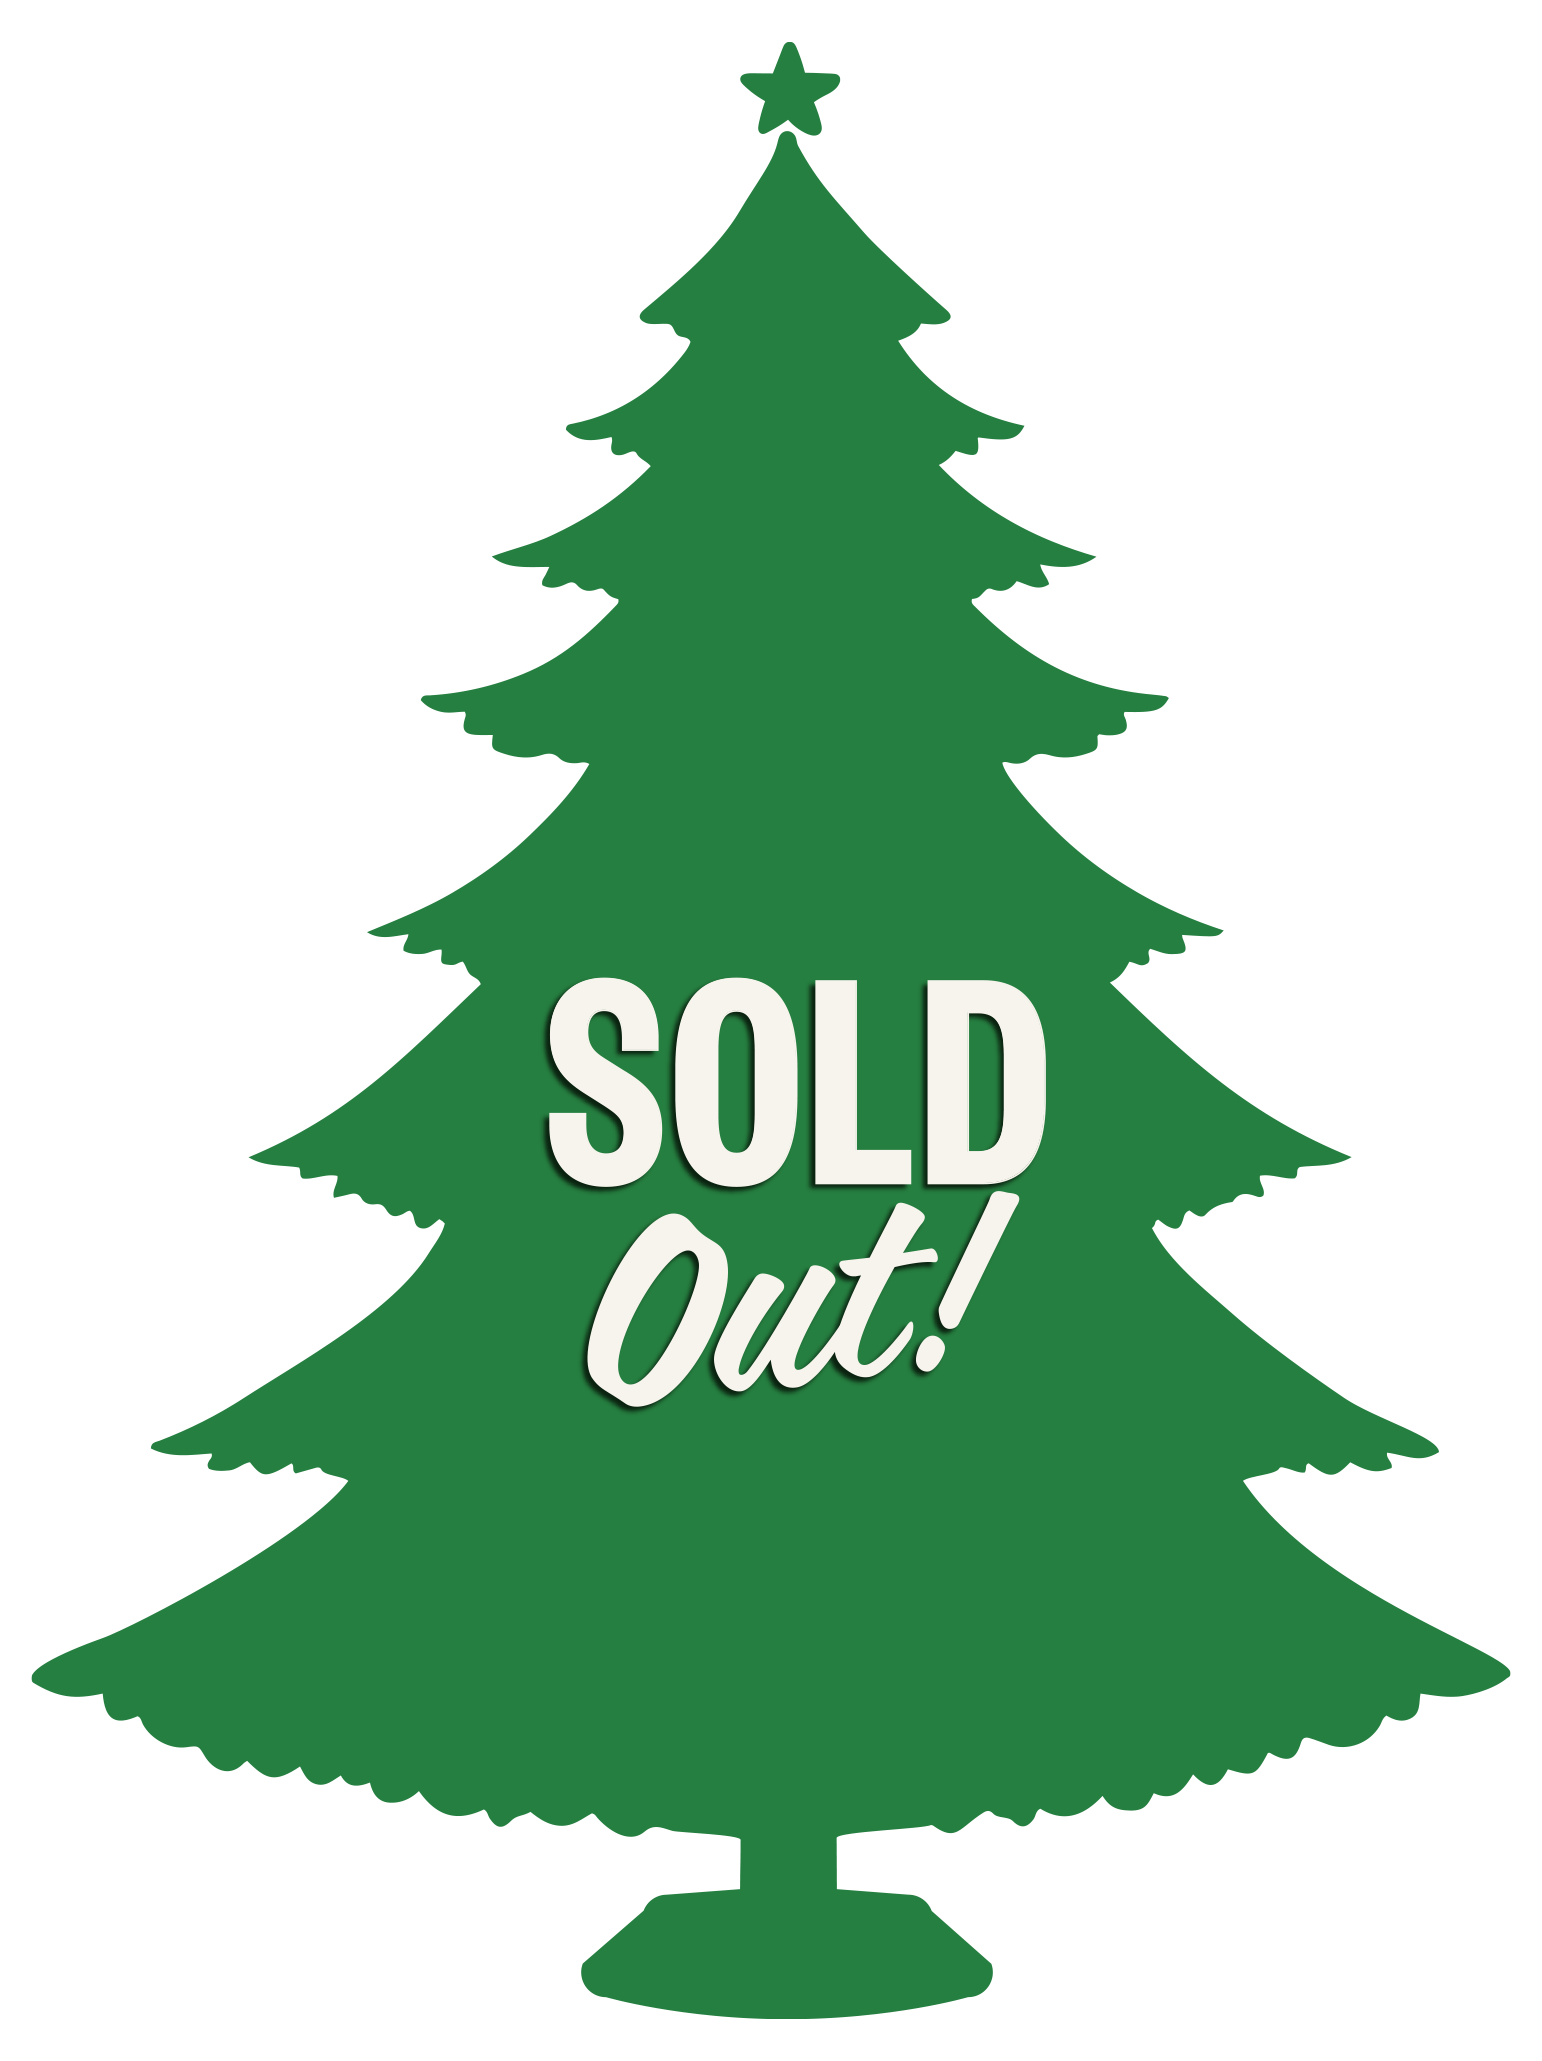 Sold out turkey